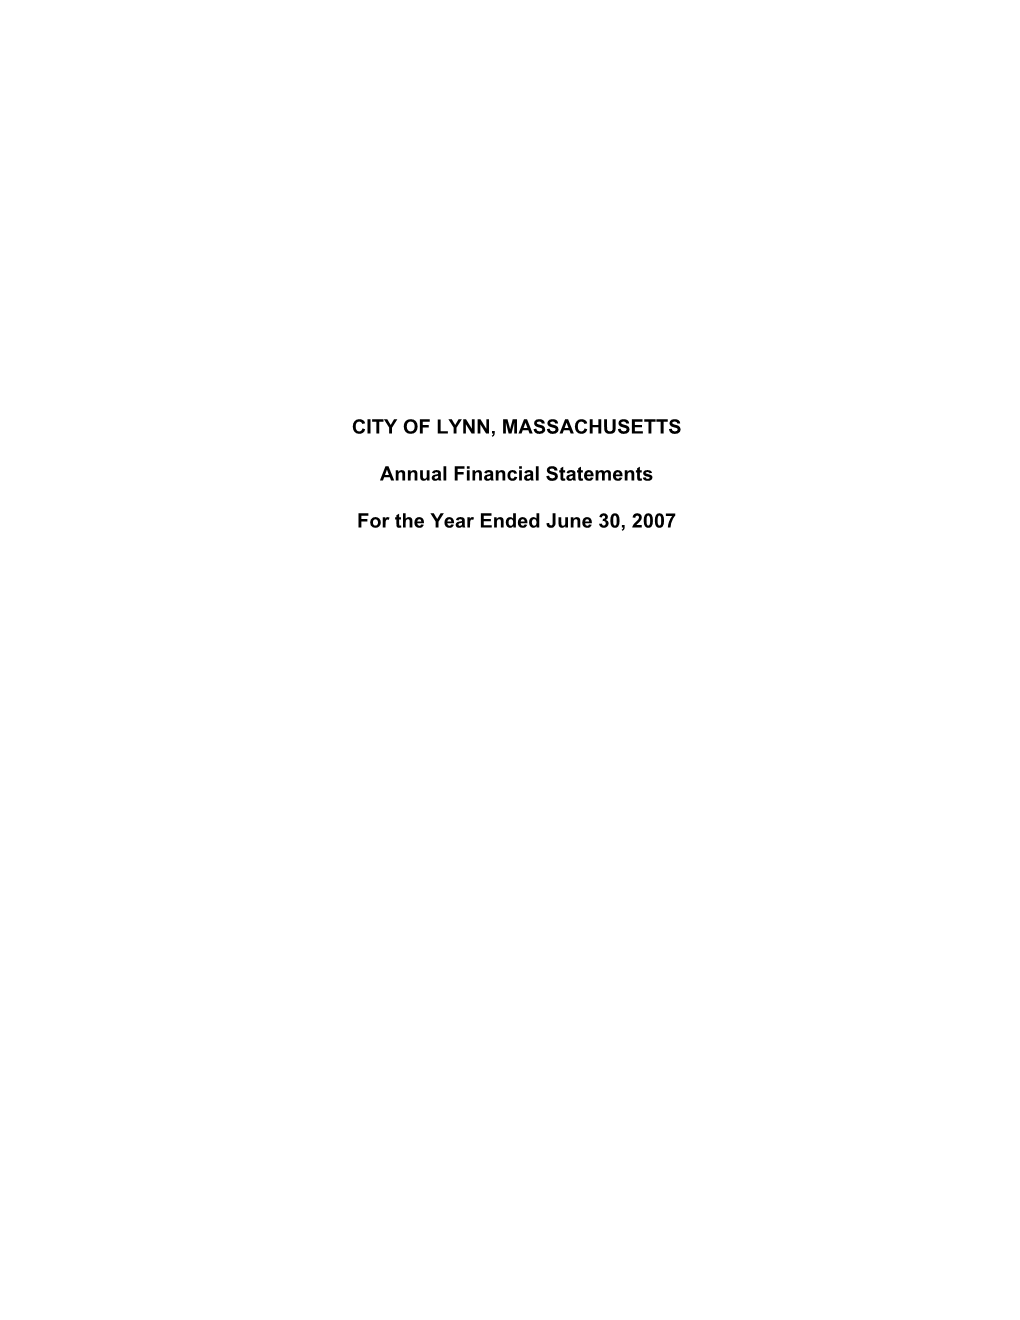 CITY of LYNN, MASSACHUSETTS Annual Financial Statements for the Year Ended June 30, 2007